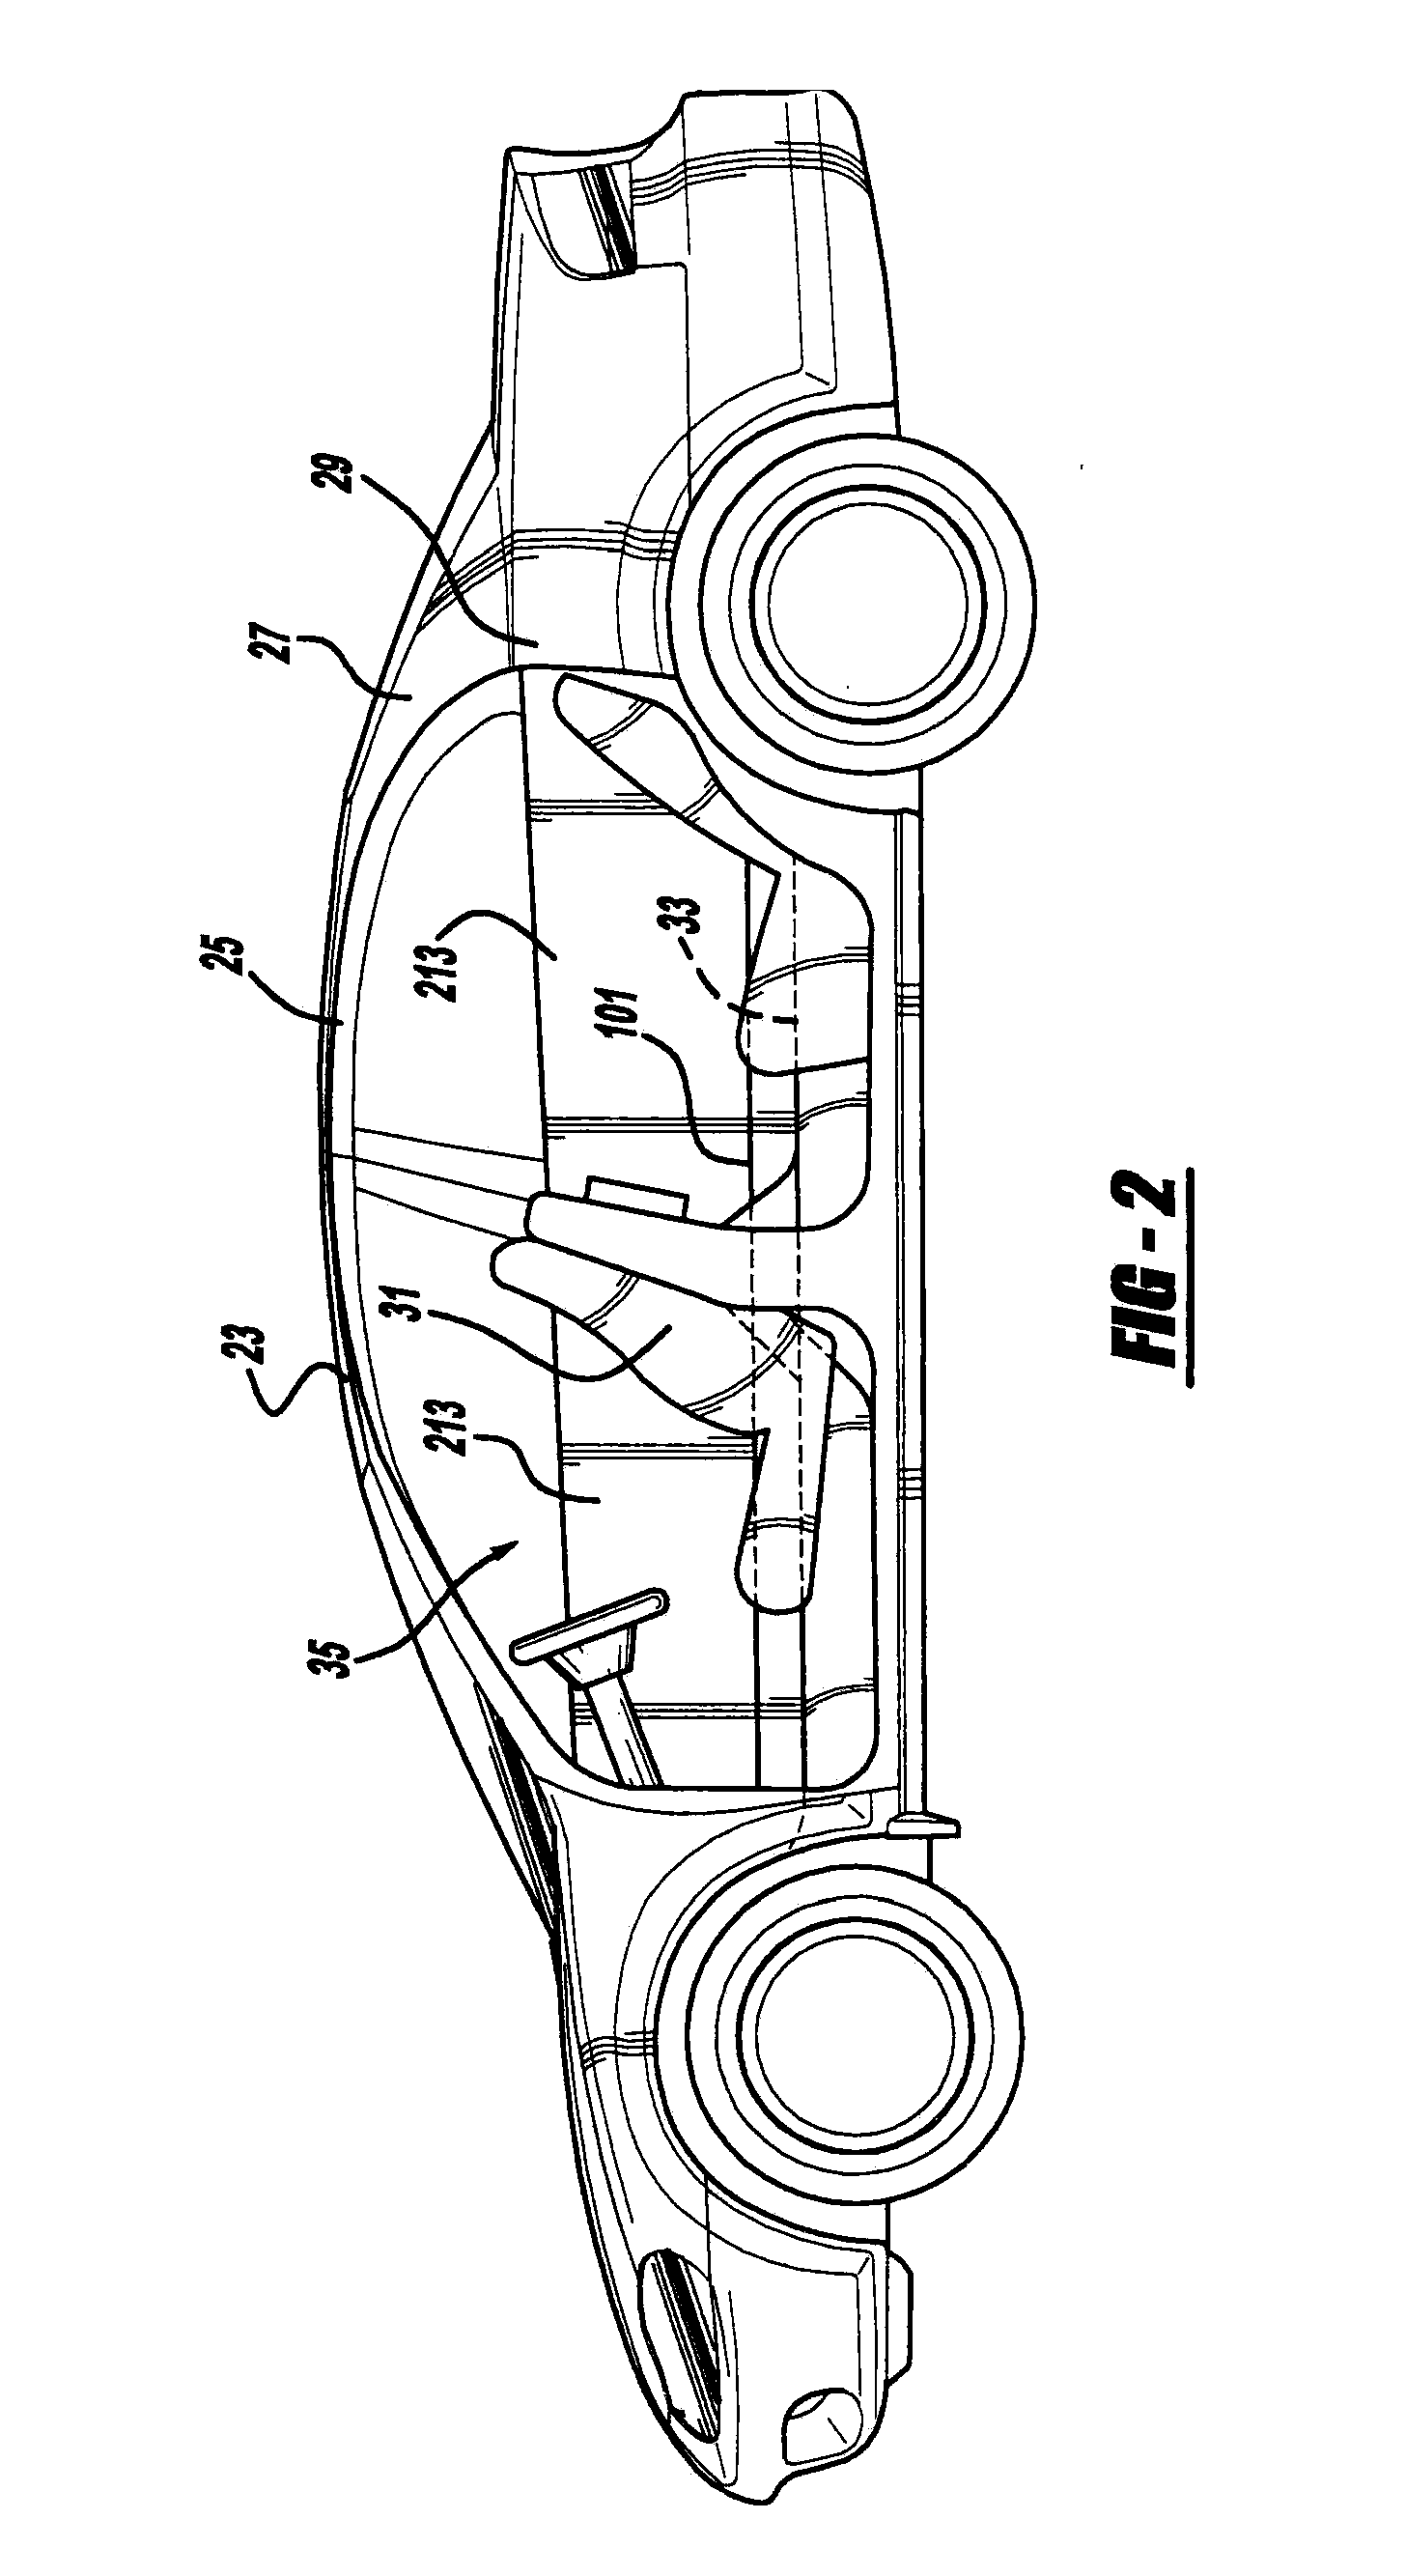 Structural System For An Automotive Vehicle